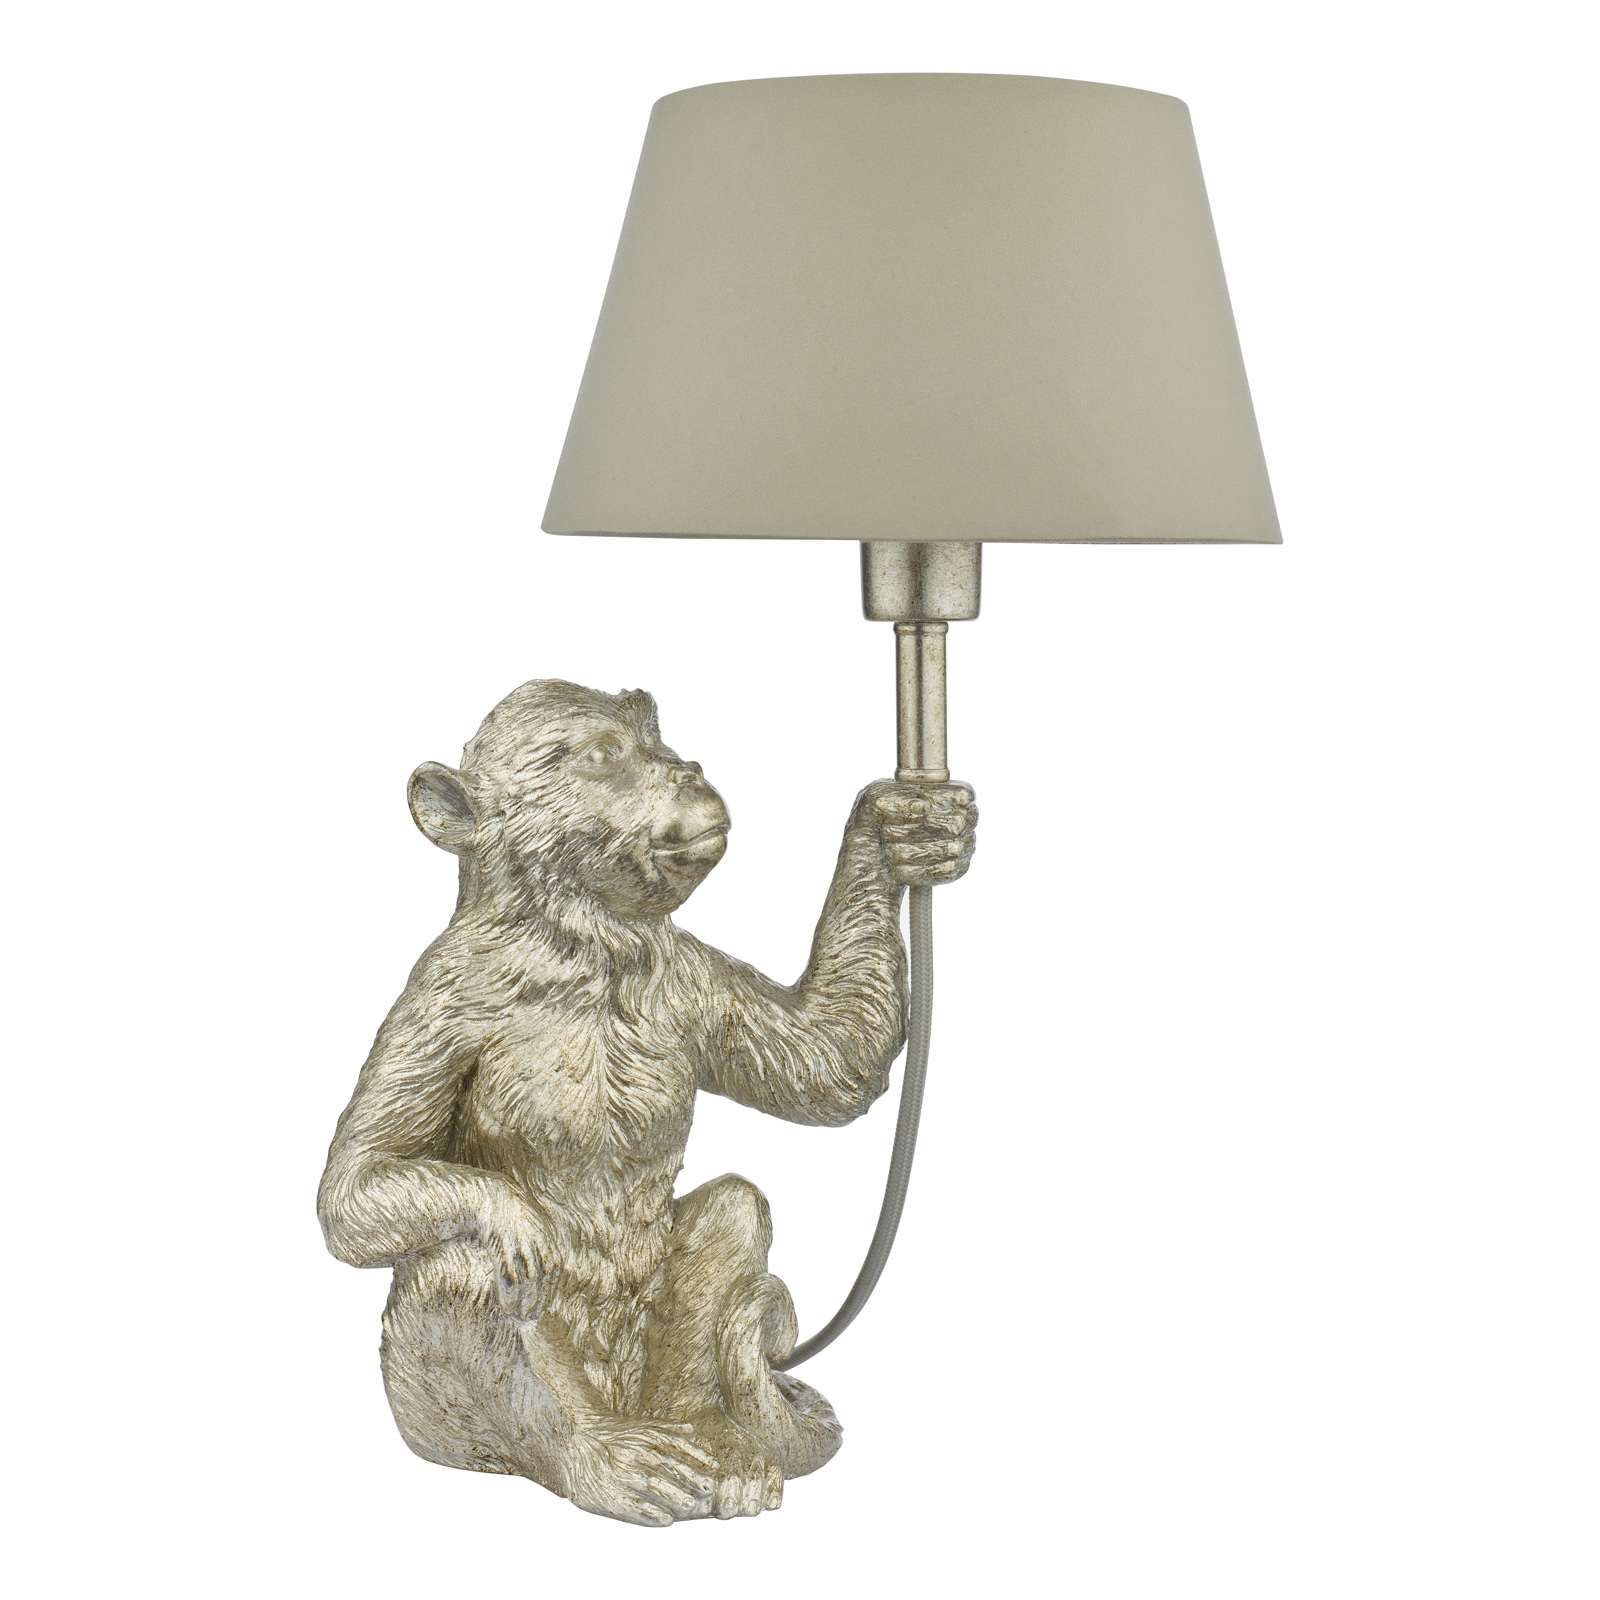 Zira Monkey Table Lamp Silver With Shade